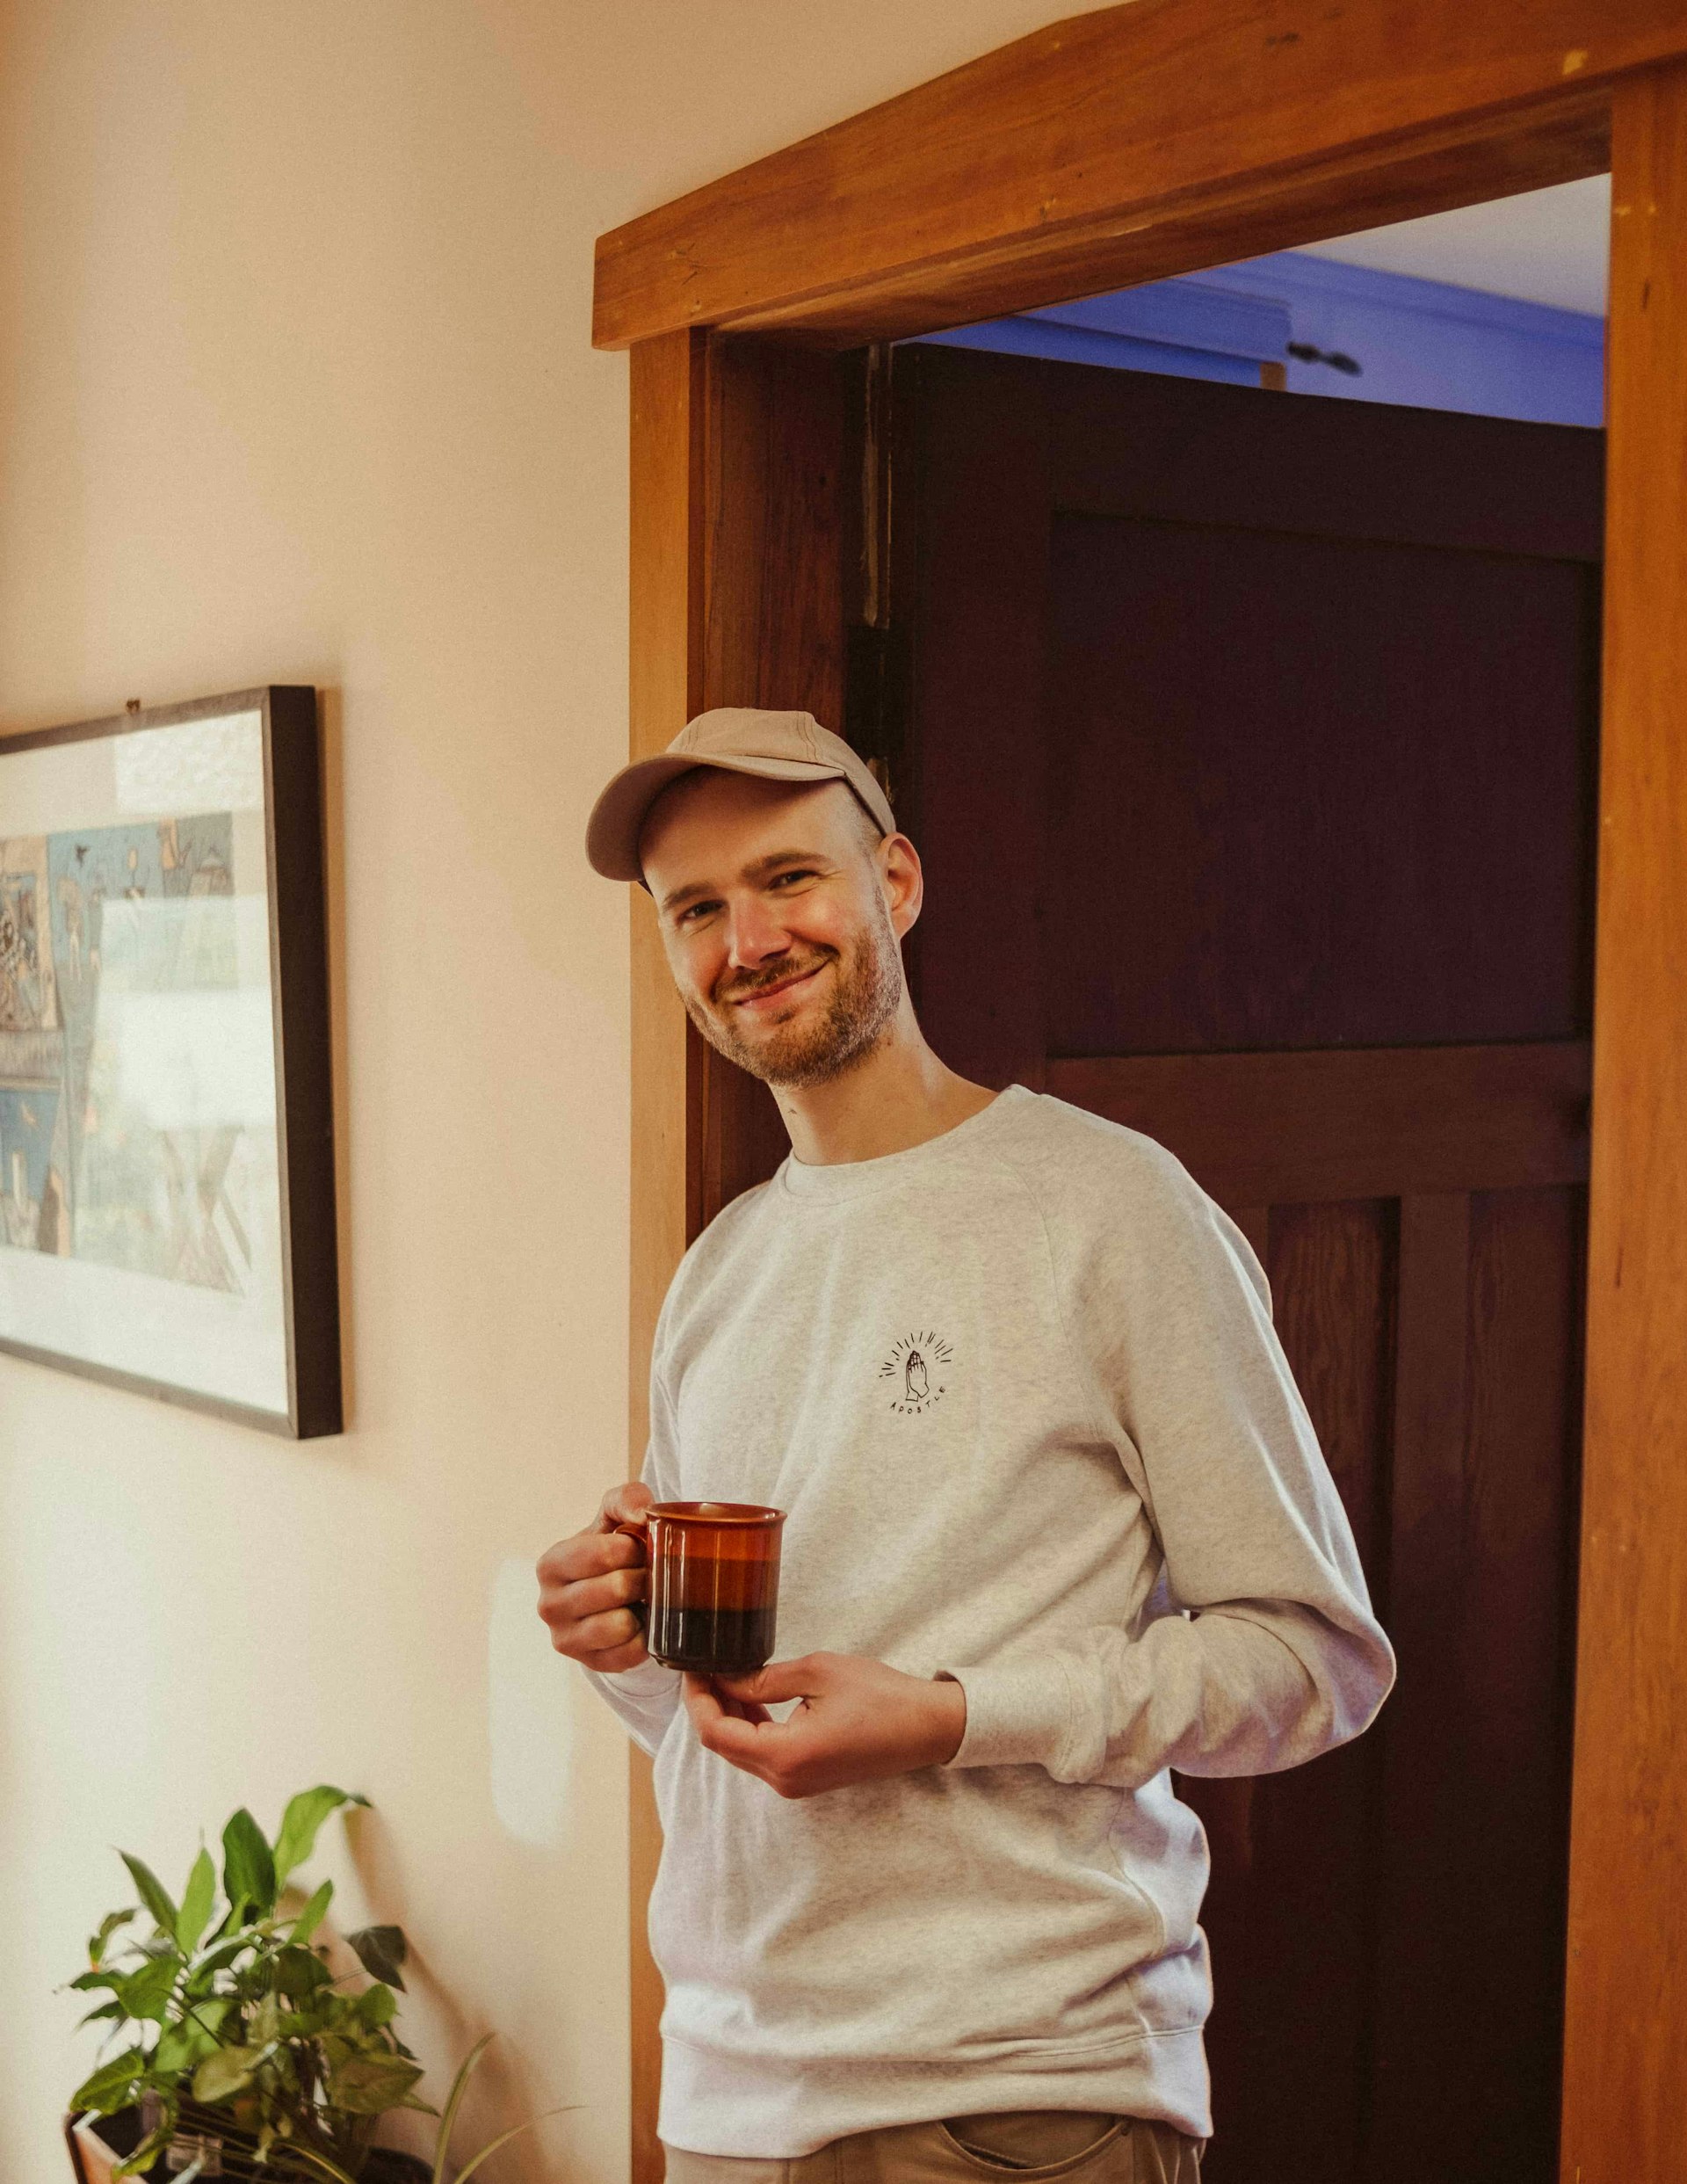 Mat stands smiling in a doorway, holding a mug.